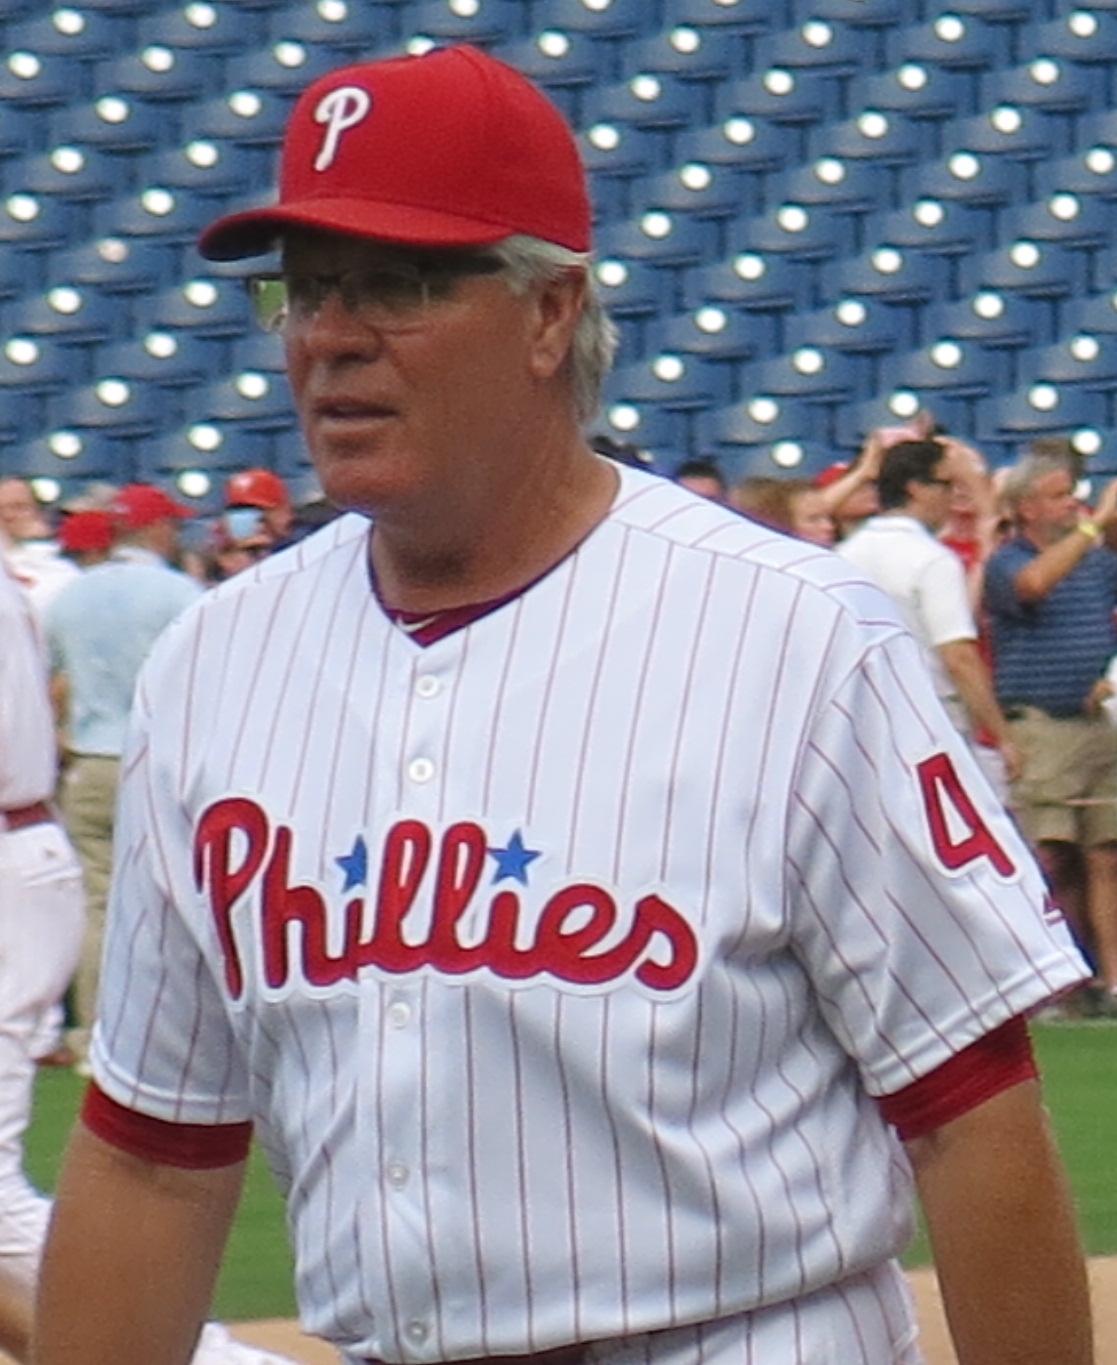 Pete Mackanin Trading Cards: Values, Tracking & Hot Deals